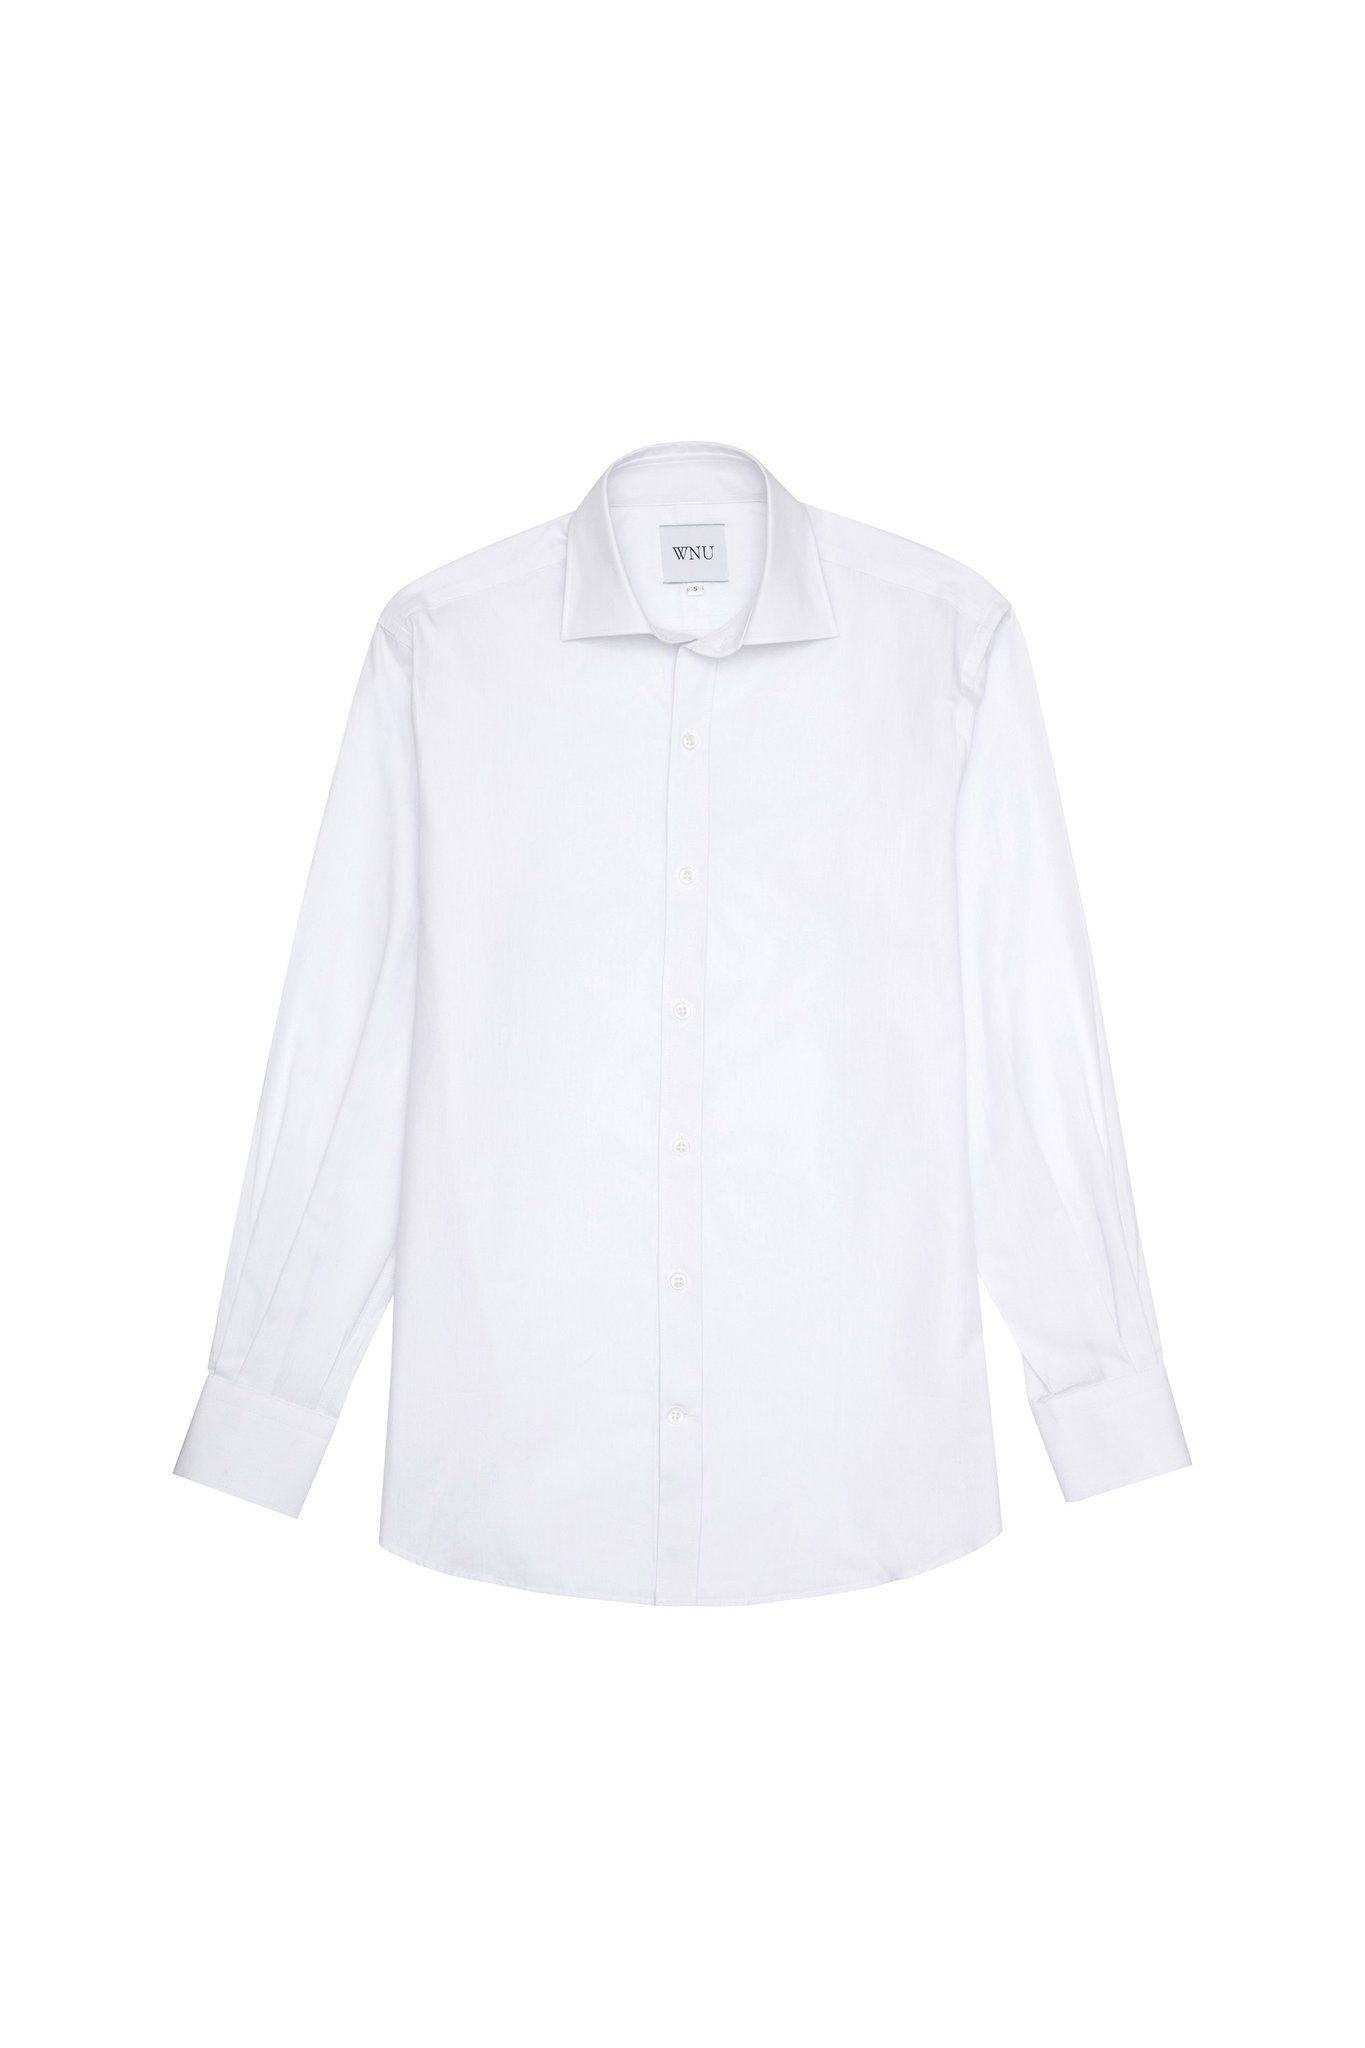 6 brands nailing the everyday shirt